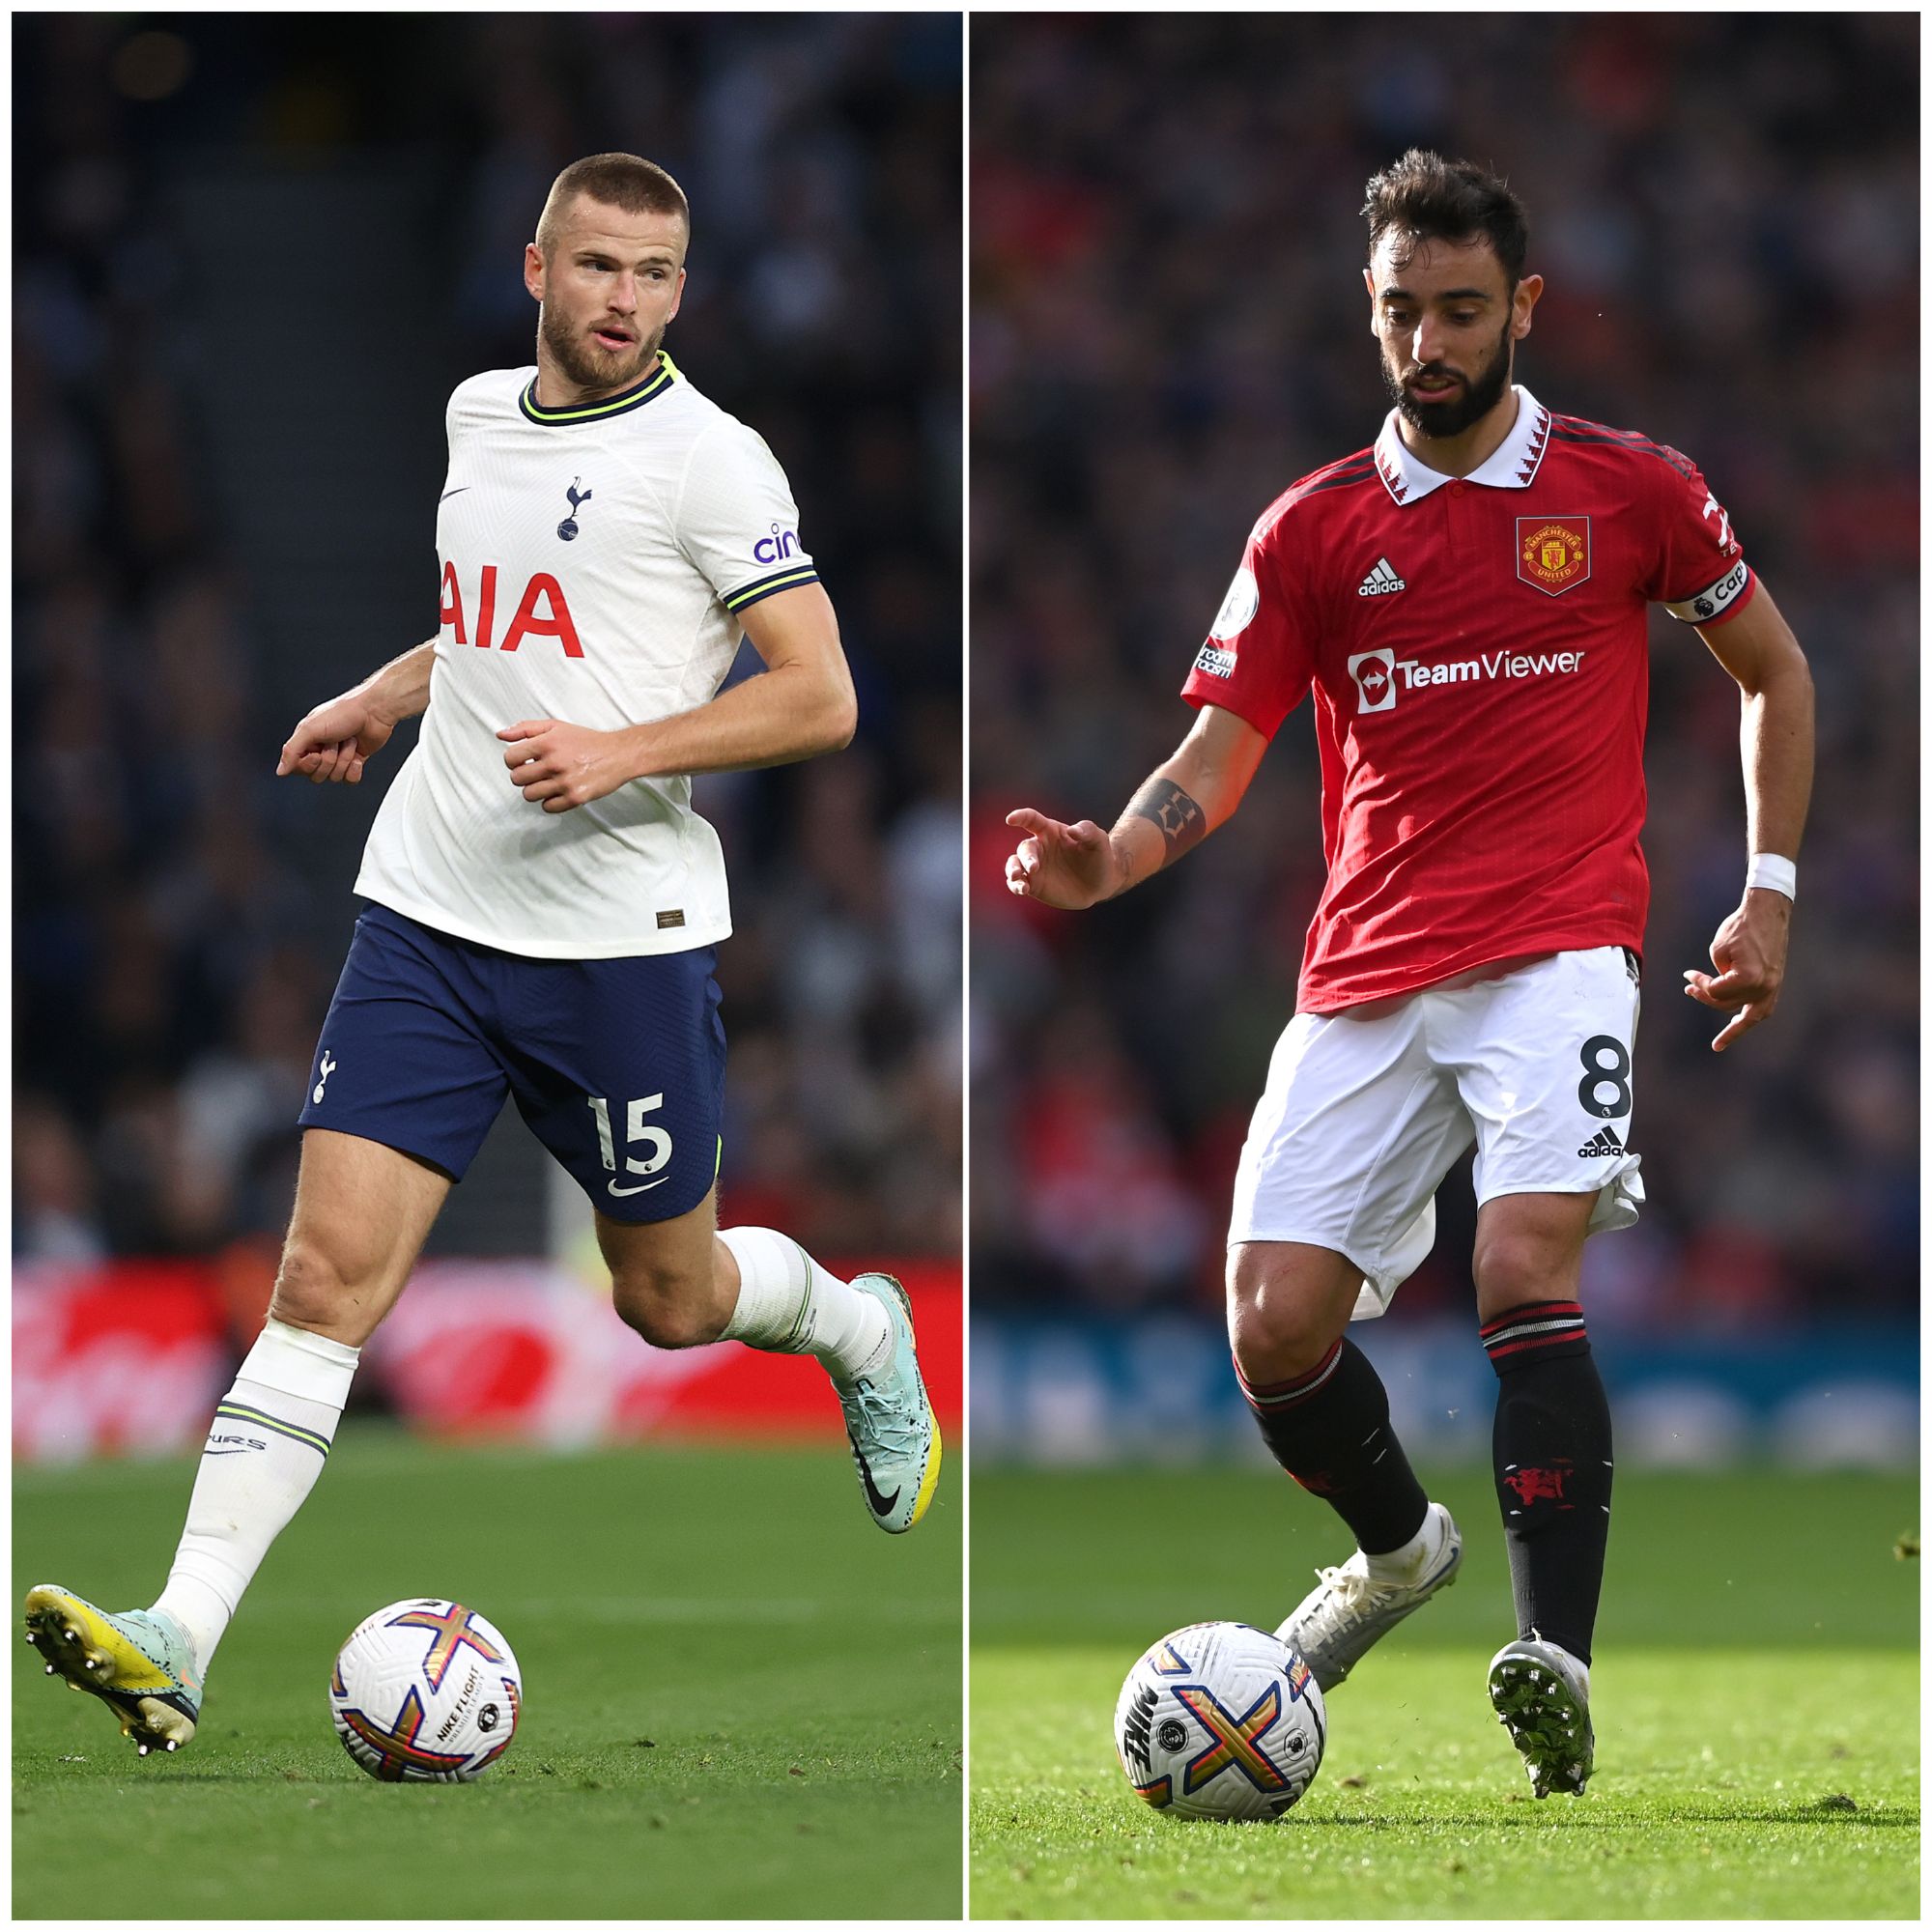 Eric Dier on the ball for Spurs and Bruno Fernandes on the ball for Man United